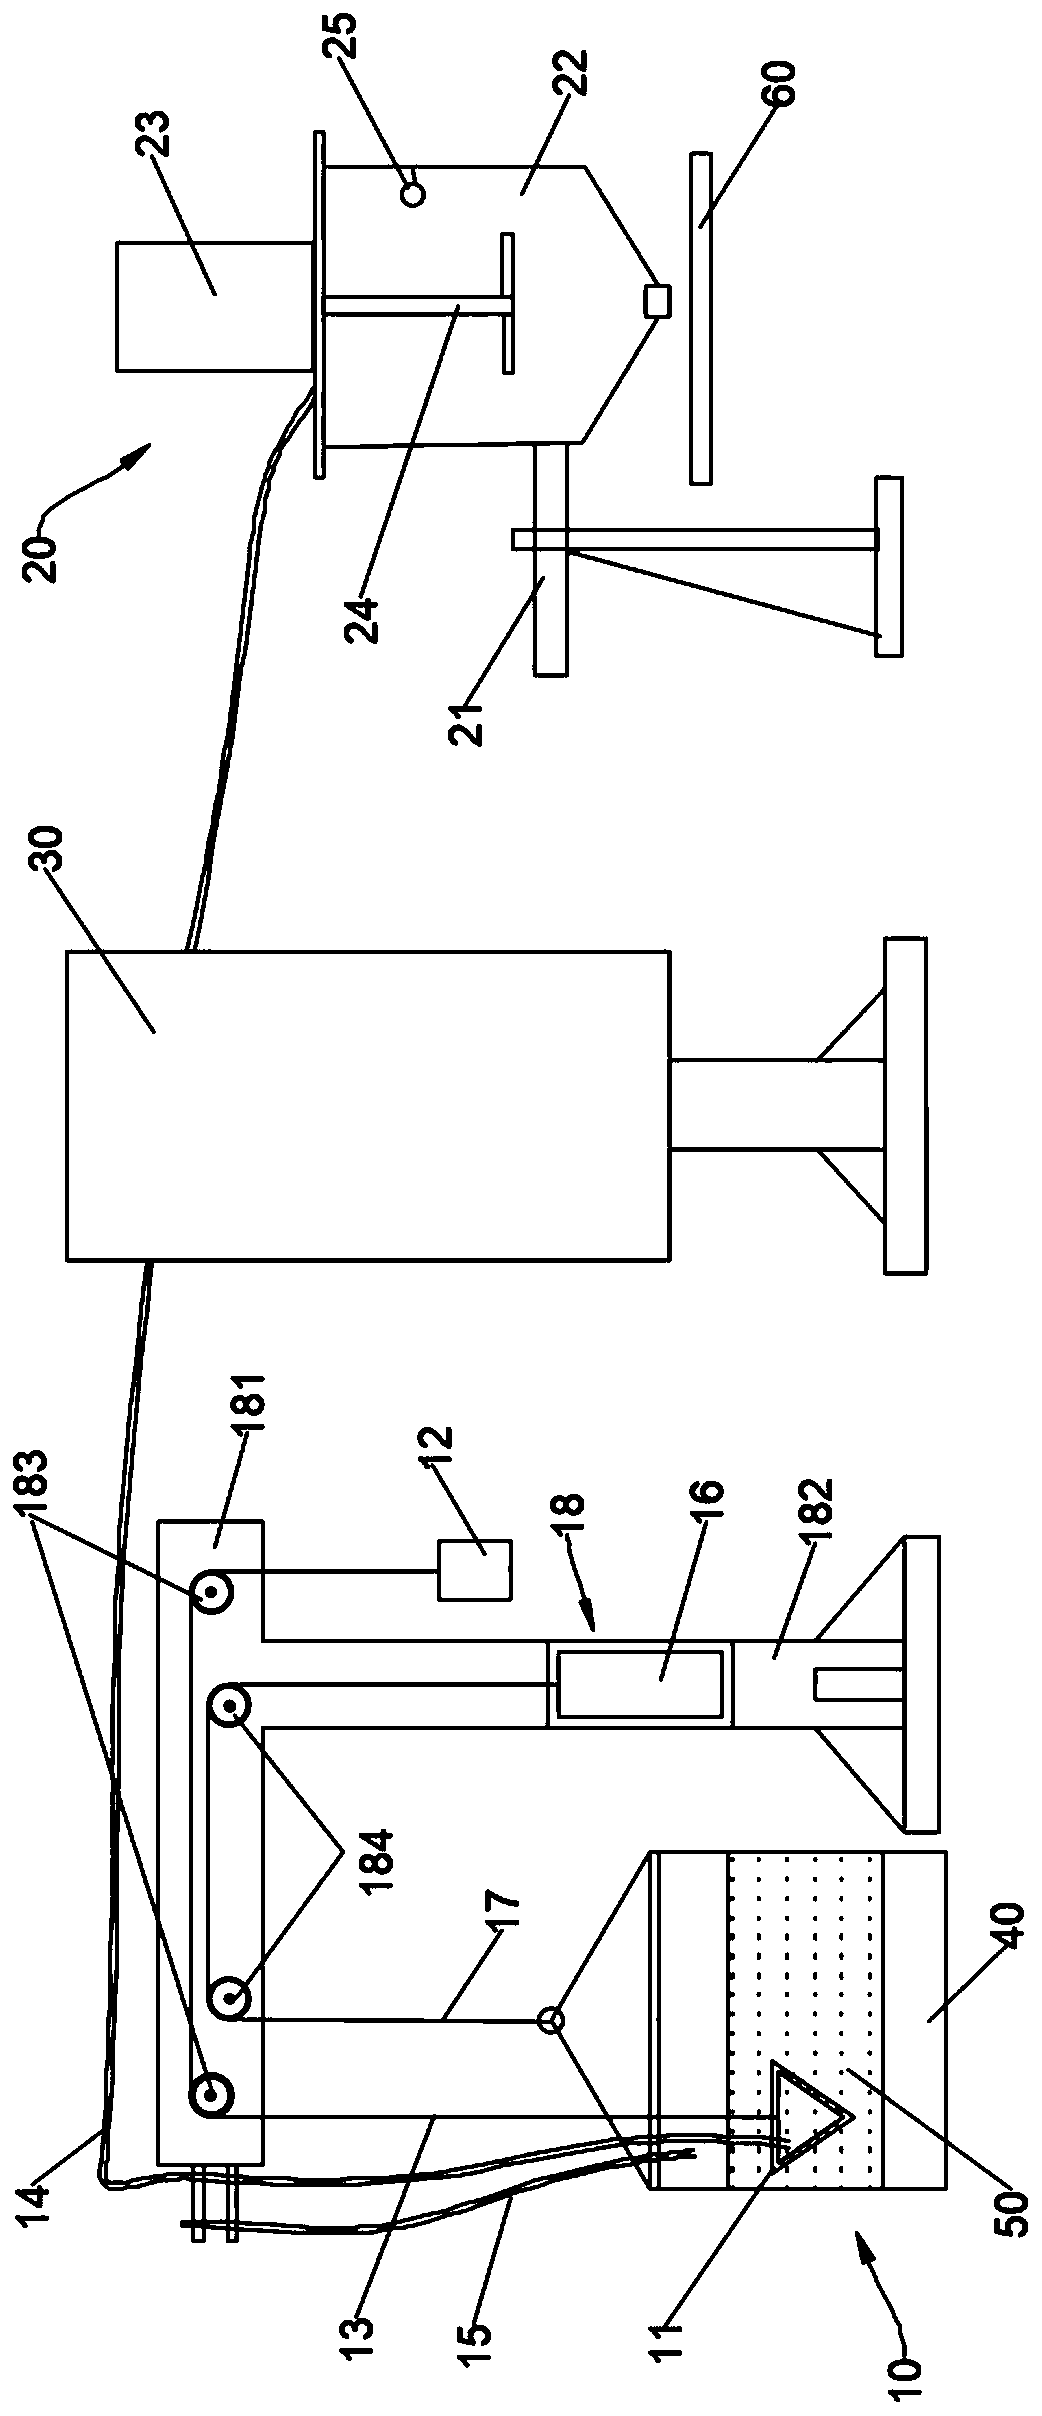 Material sucking device and filling equipment